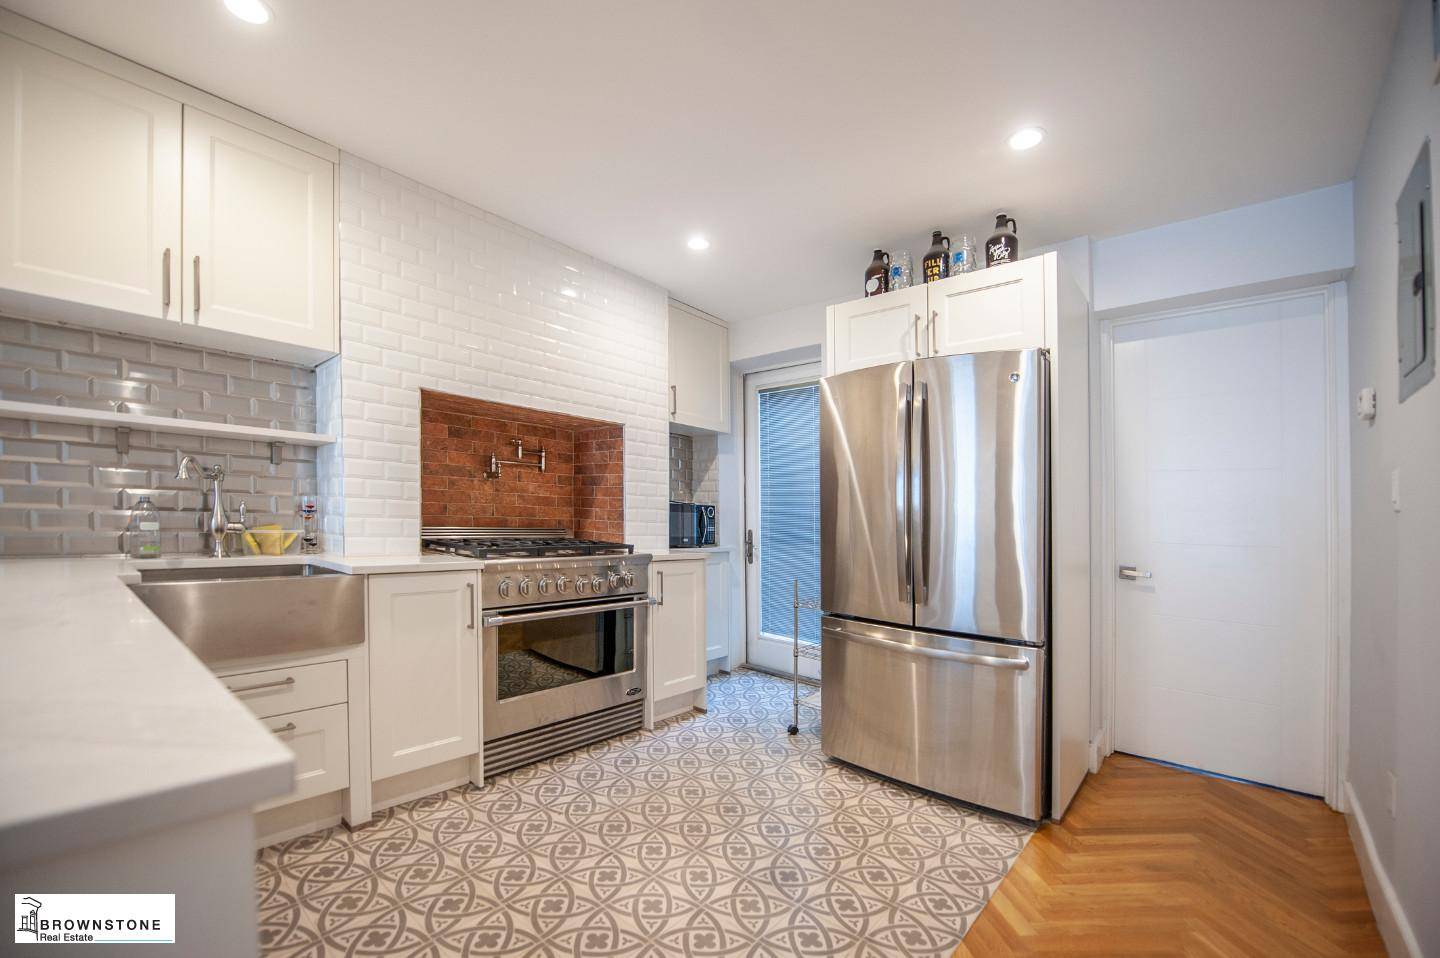 This cutting edge two bedroom lower duplex has it all.